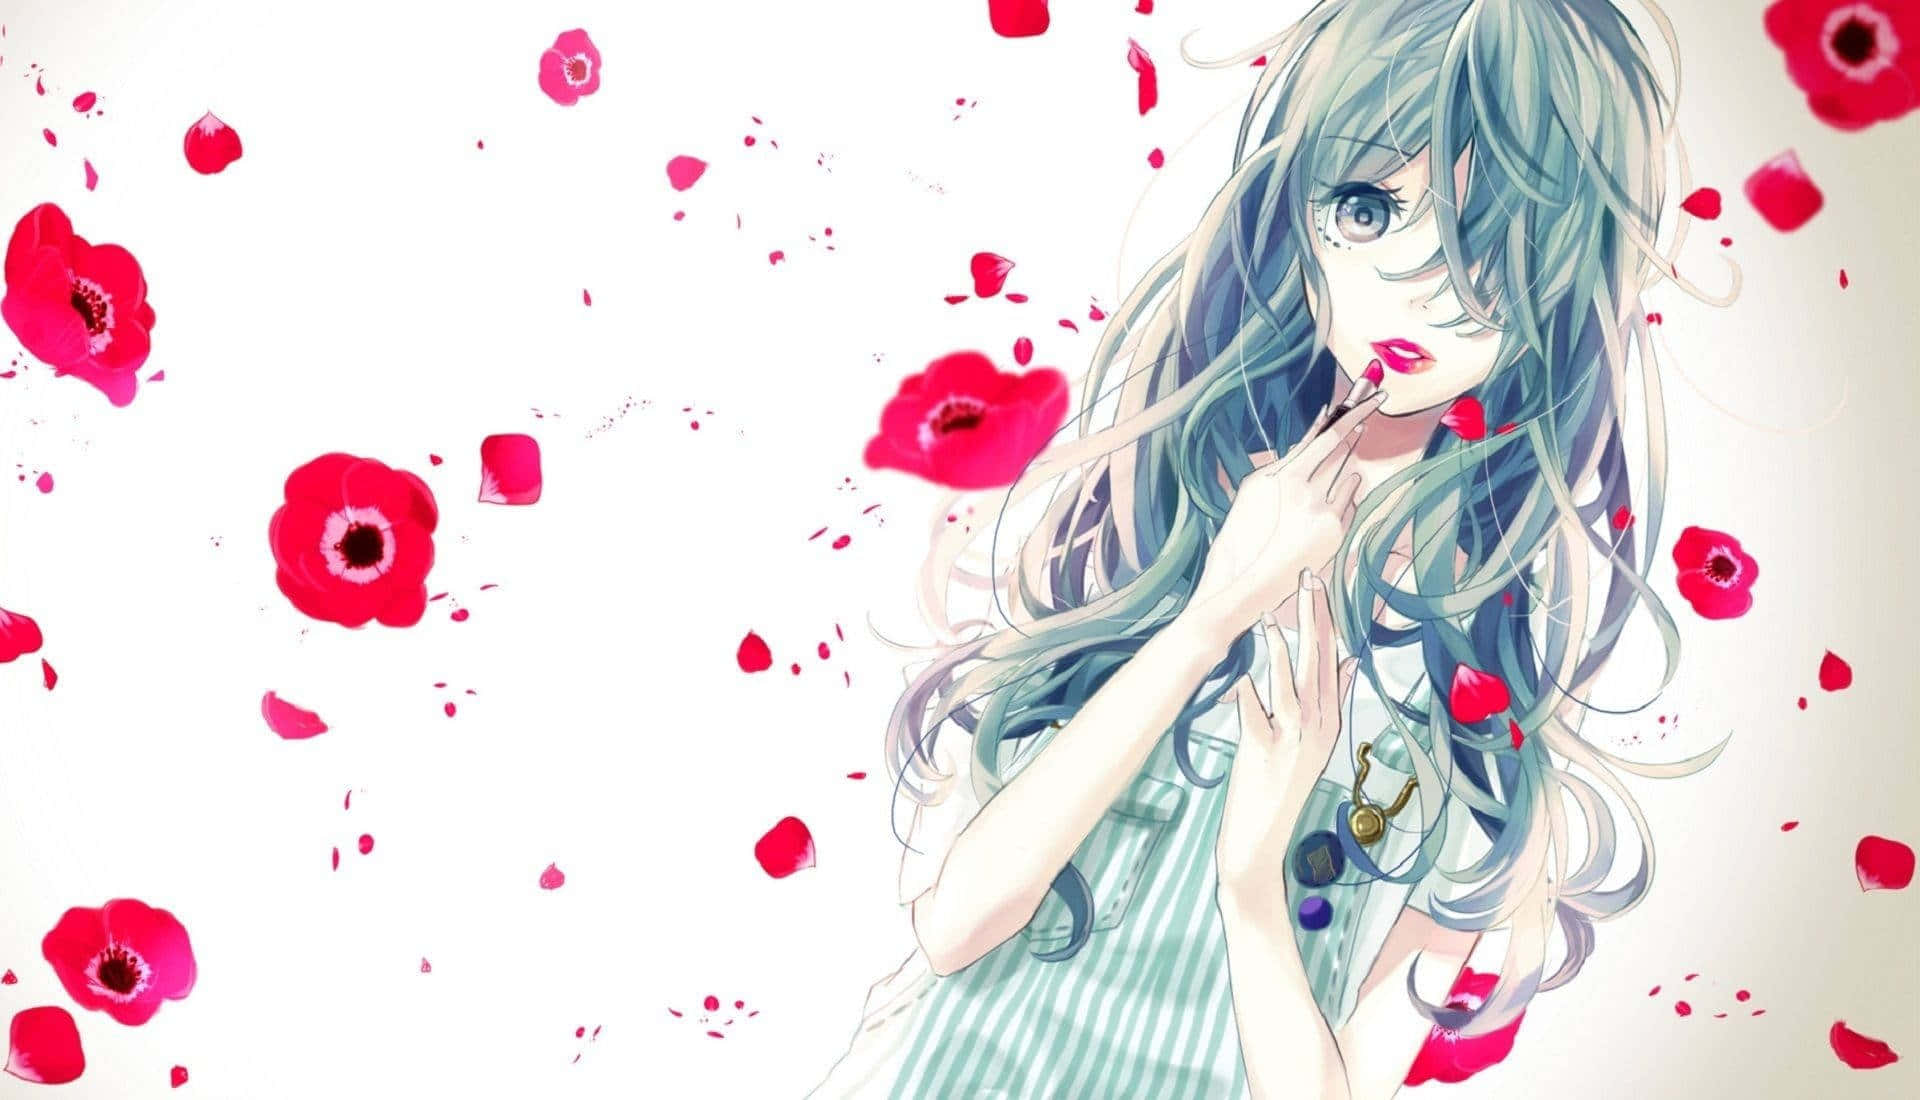 Anime Girl Surroundedby Red Flowers Wallpaper